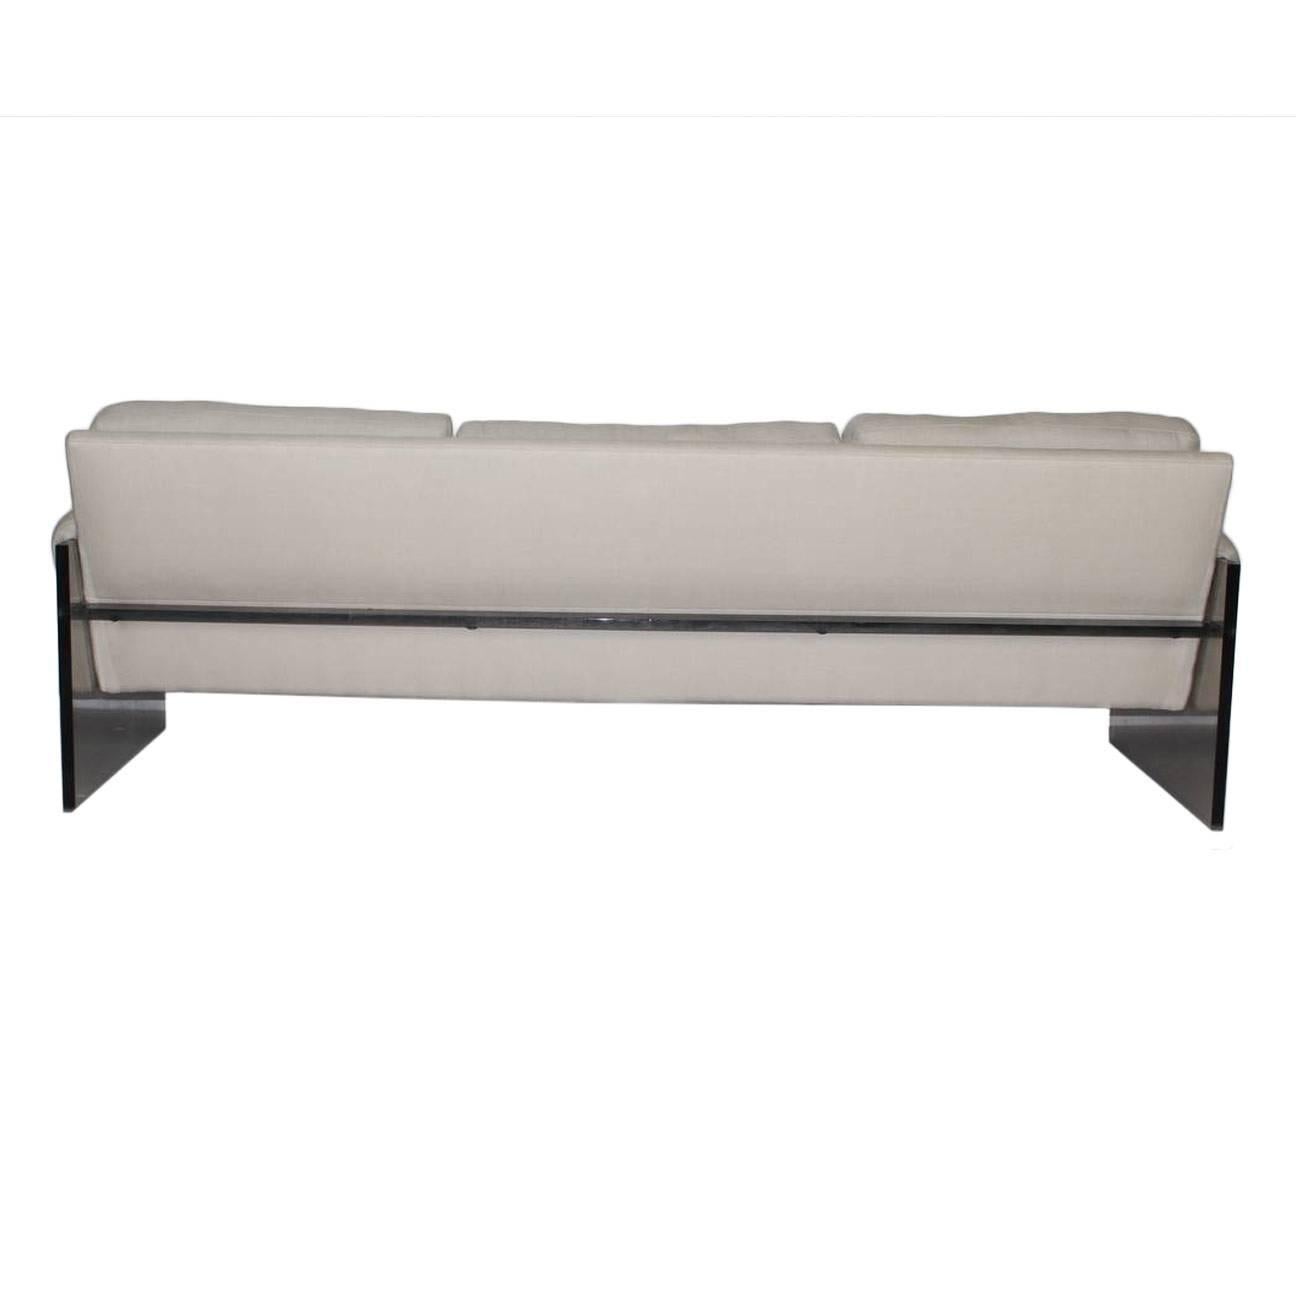 Milo Baughman Lucite three-seat sofa. The cushions and the arms are upholstered in cotton light gray. The cushions are foam.